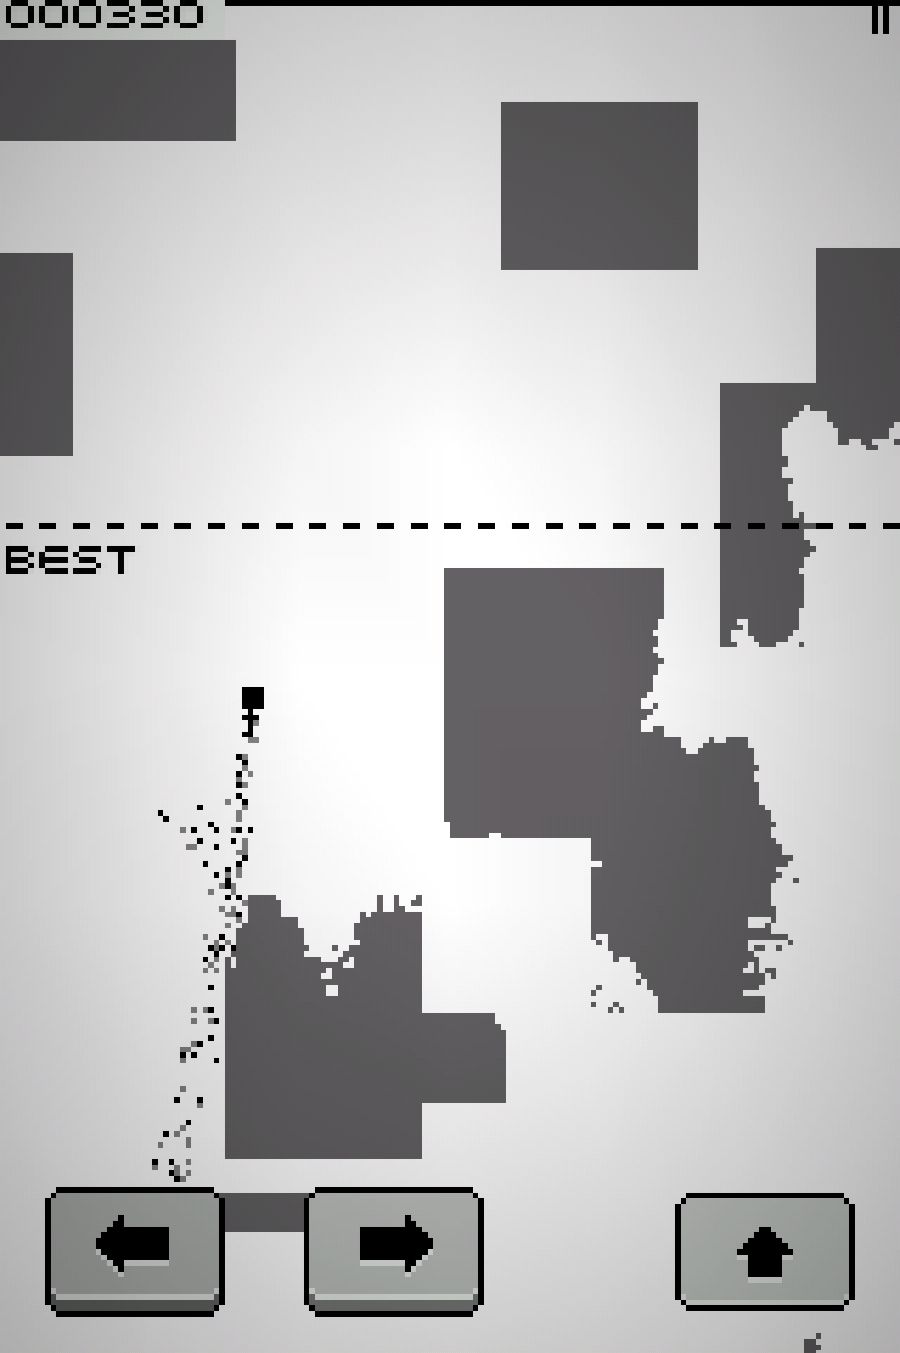 Spout: monochrome mission - Android game screenshots.